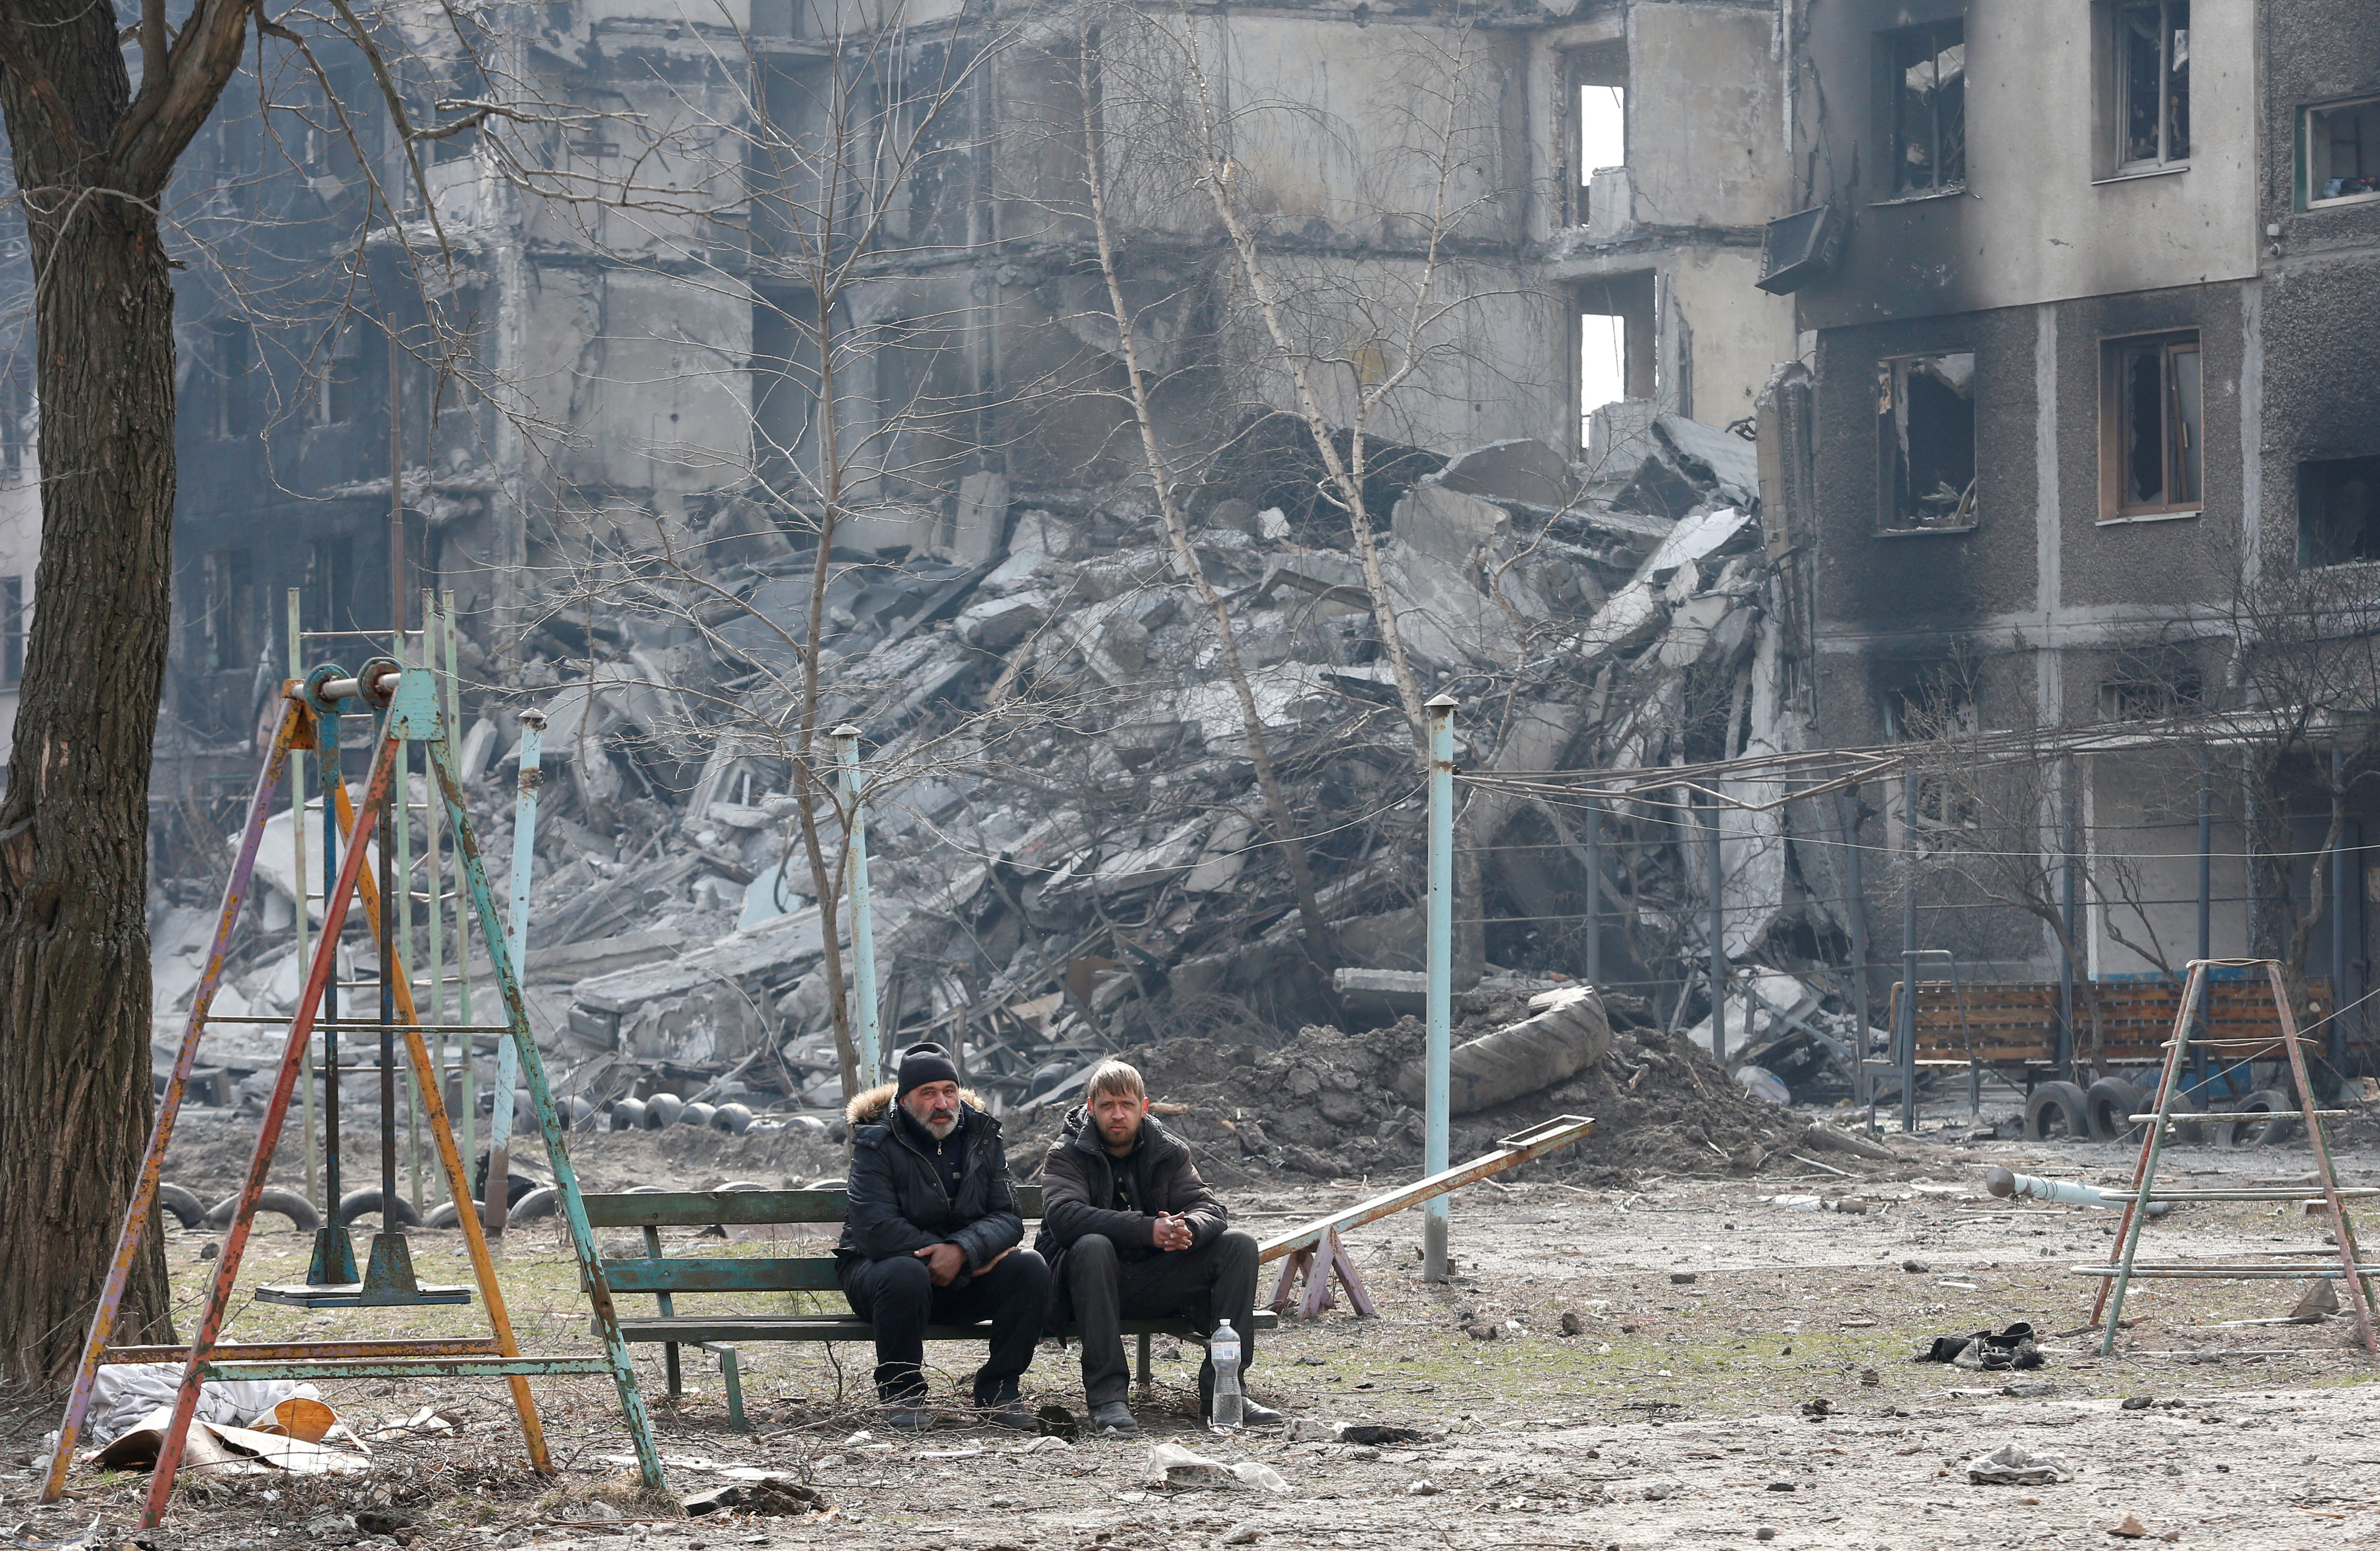 Local residents sit on a bench in the besieged city of Mariupol